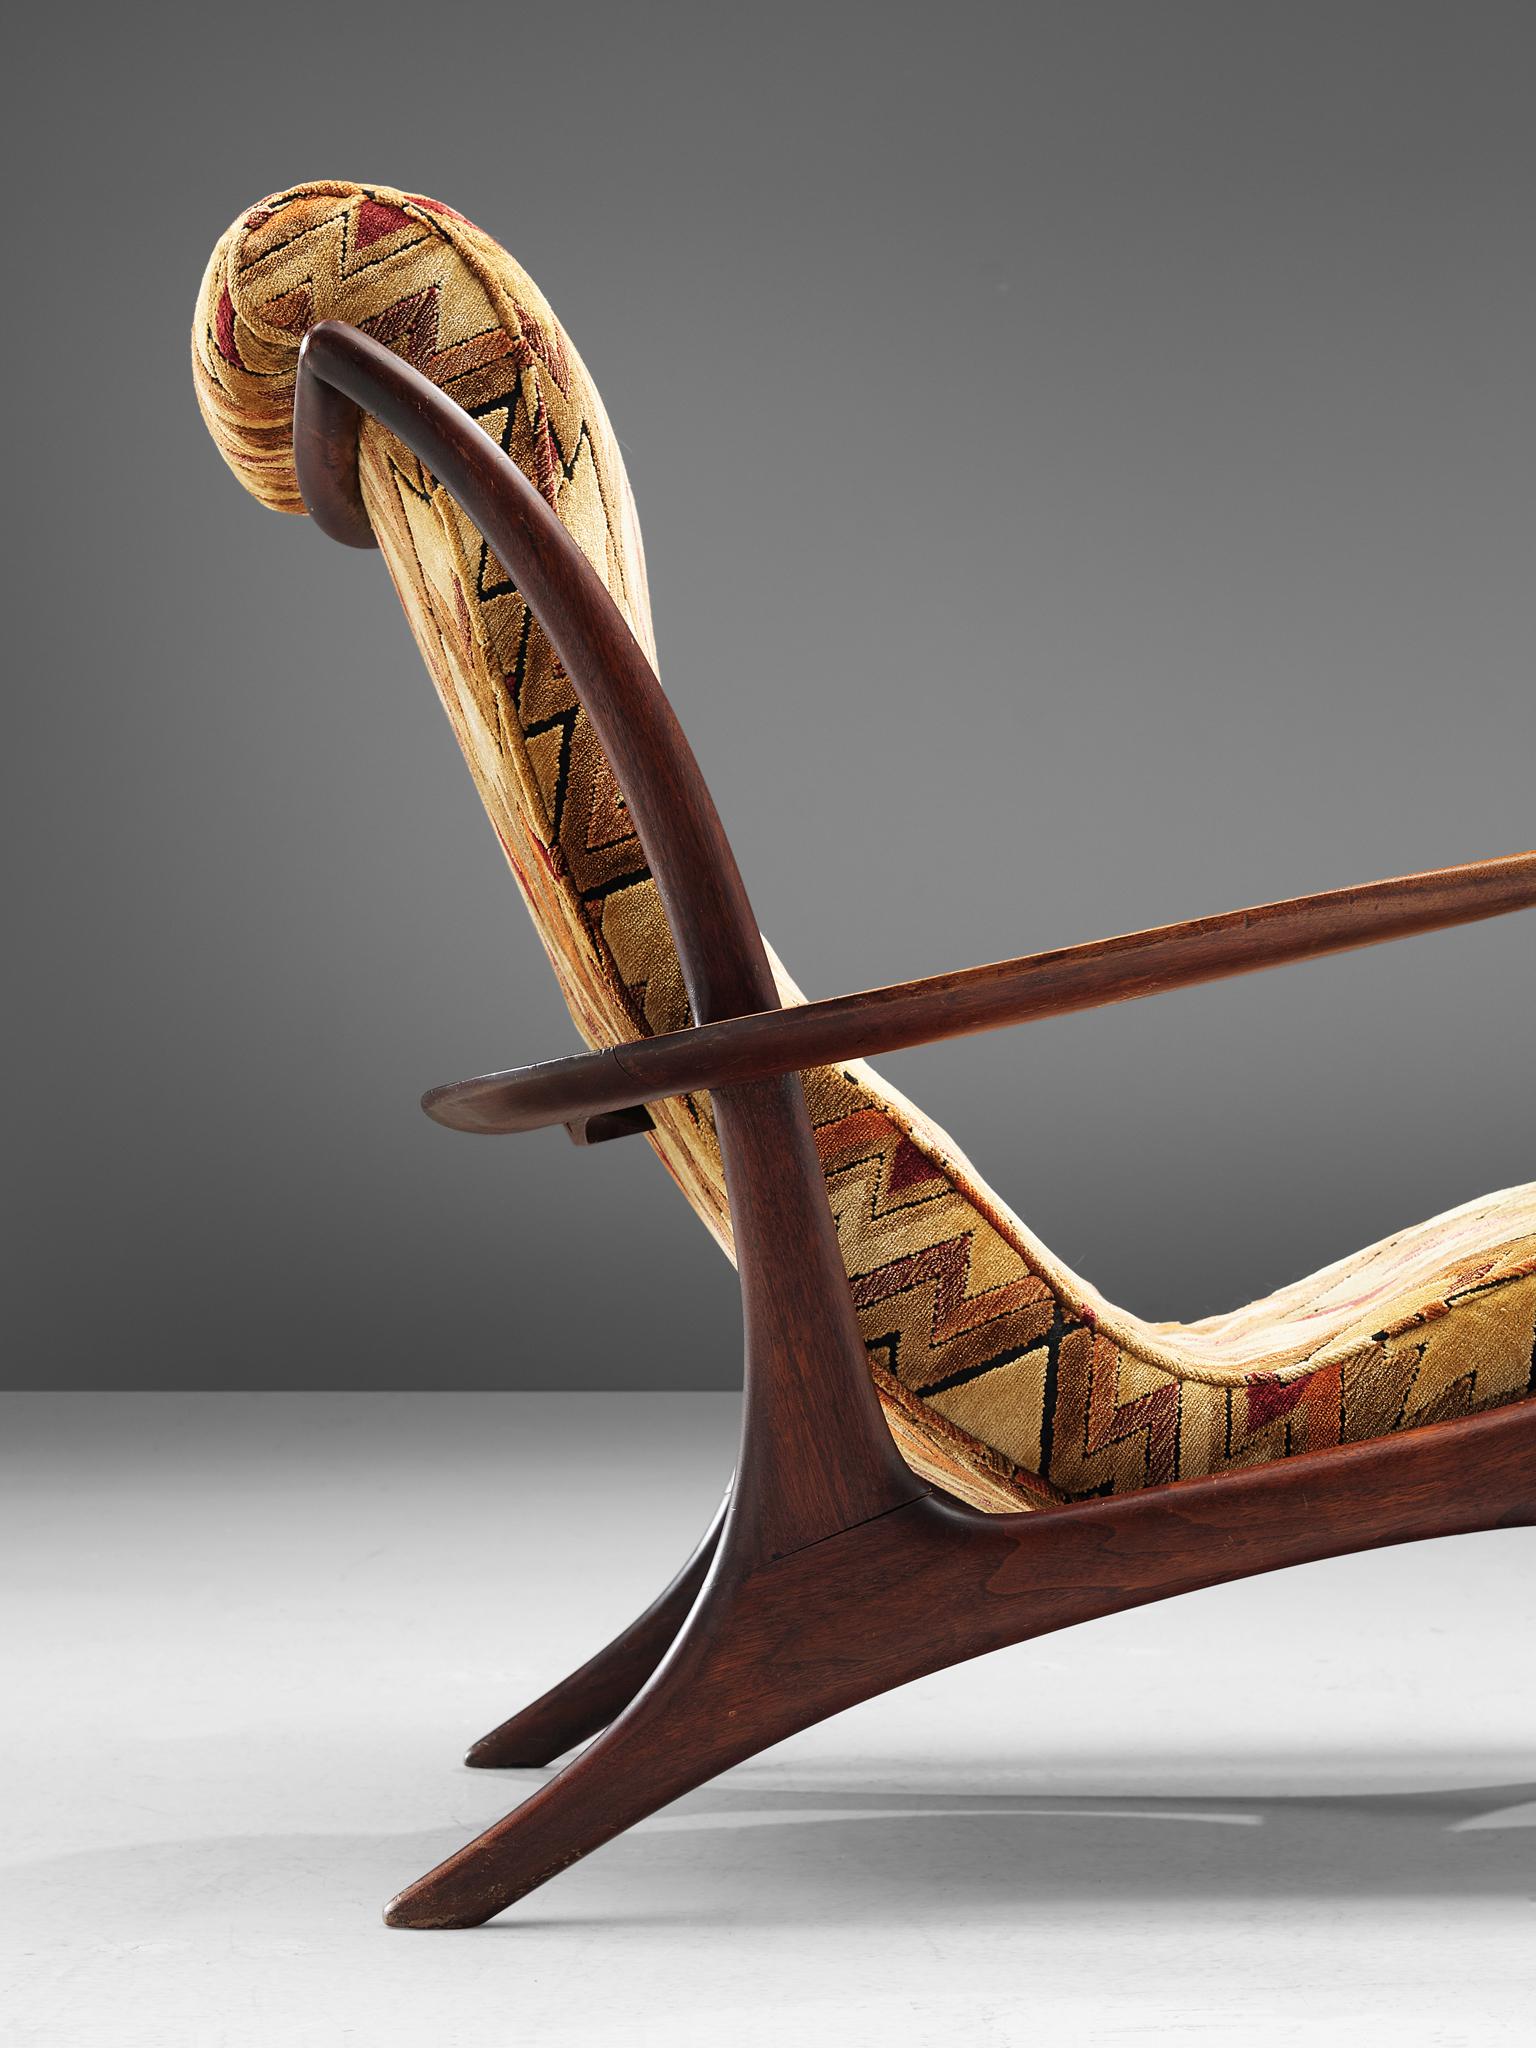 Fabric Vladimir Kagan 'Contour' Lounge Chair in Patterned Upholstery